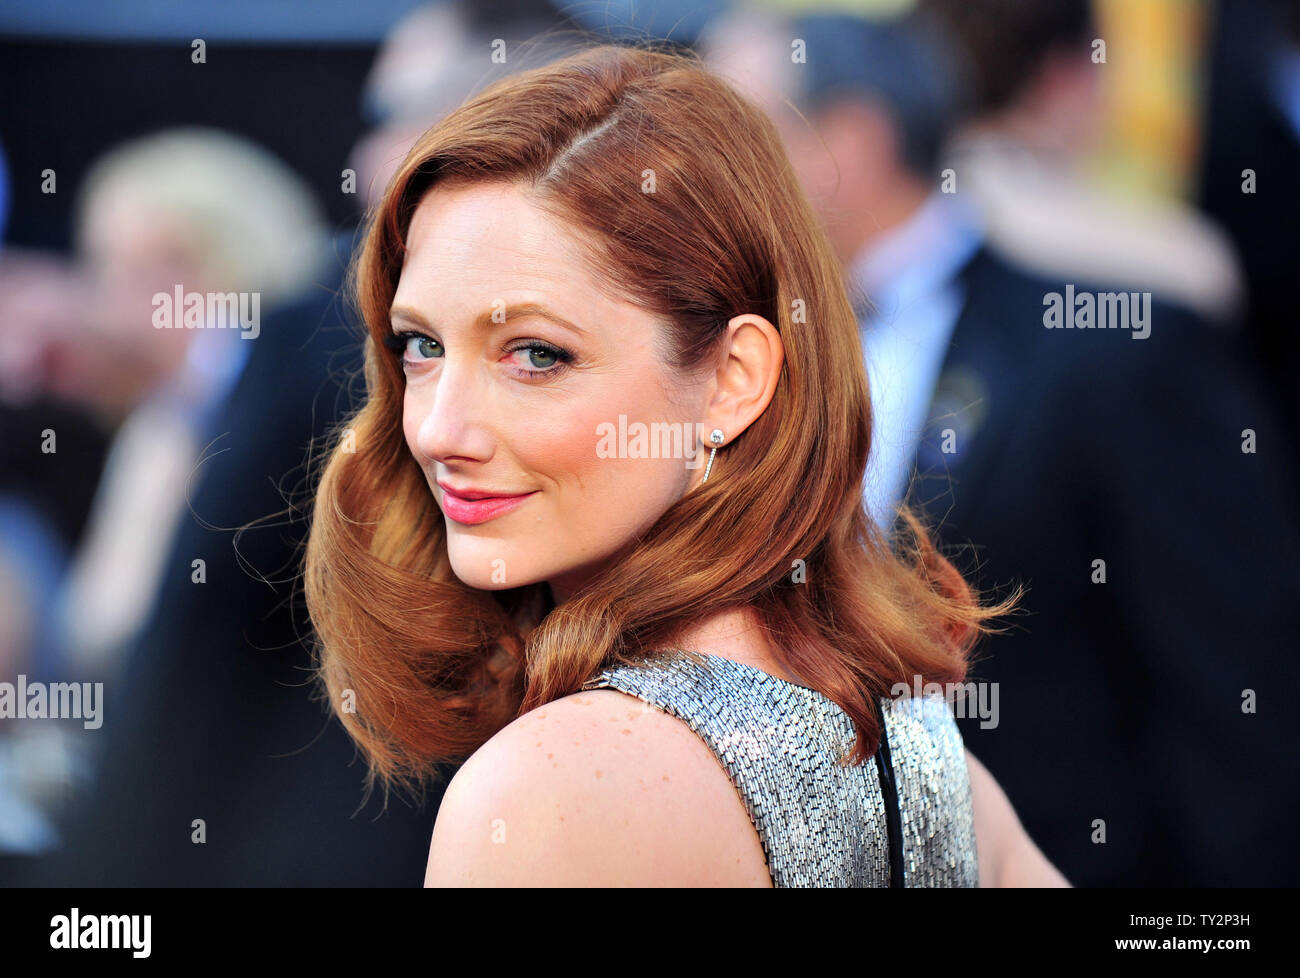 Judy Greer arrives on the red carpet at the 84th Academy Awards at the Hollywood and Highlands Center in the Hollywood section of Los Angeles on February 26, 2012.       UPI/Kevin Dietsch Stock Photo